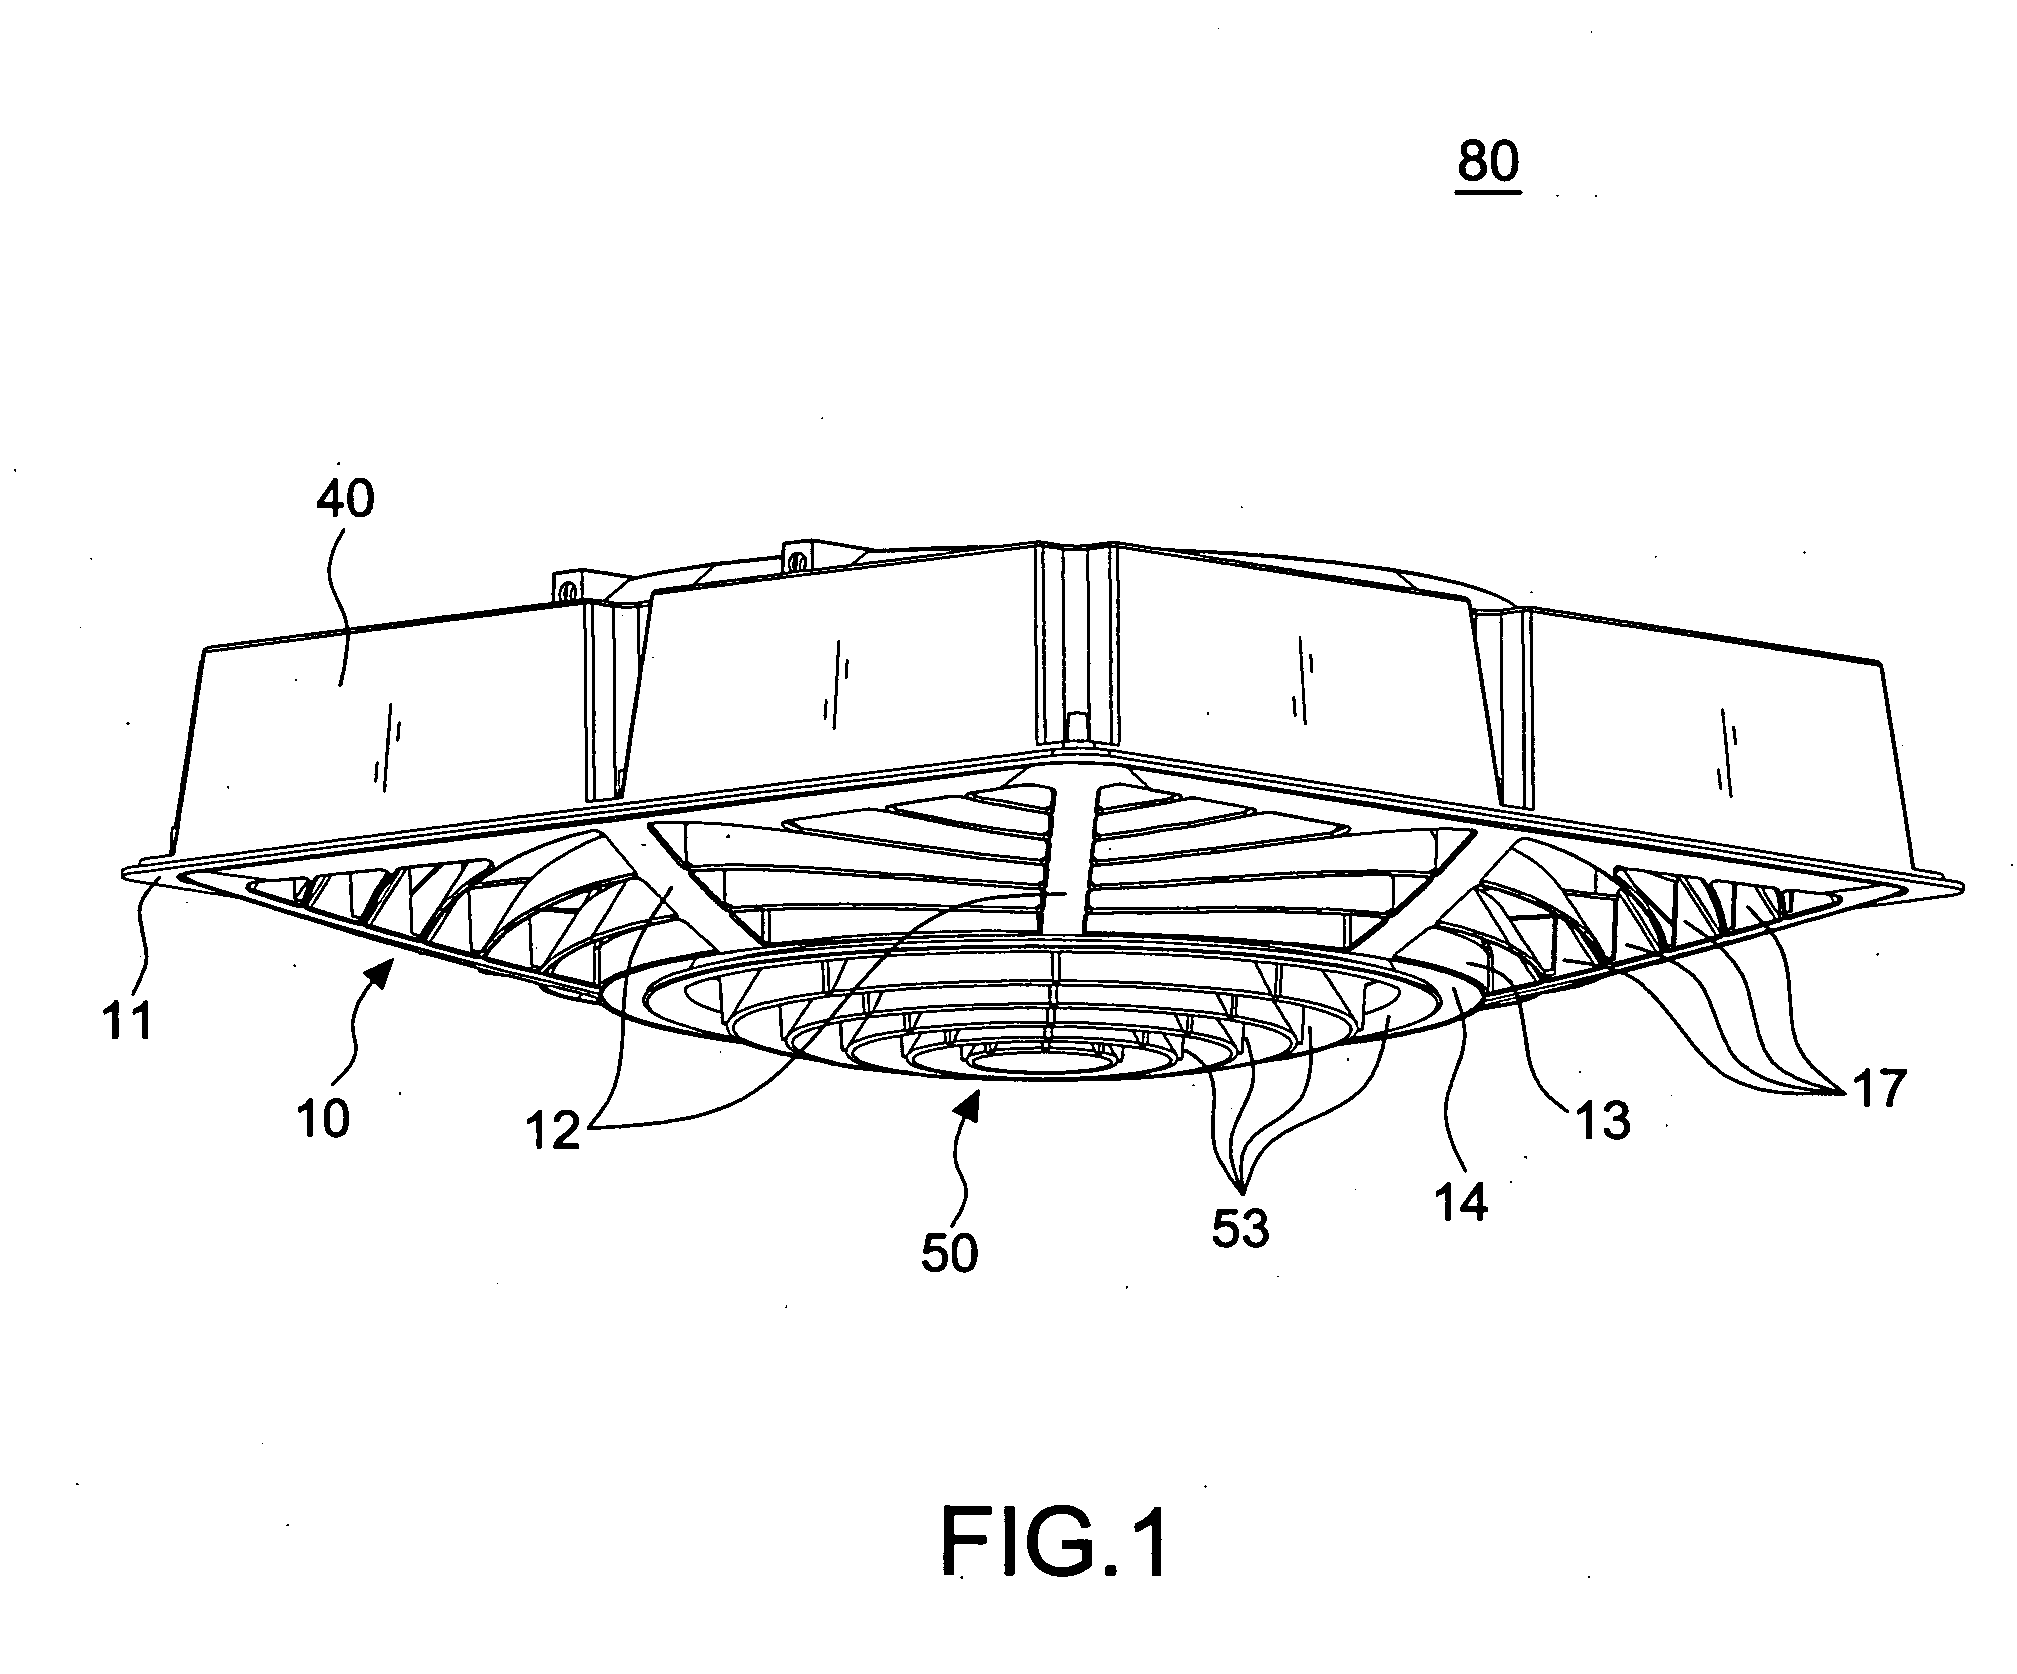 Airflow-cooling apparatus for a ceiling air-conditioning circulation machine